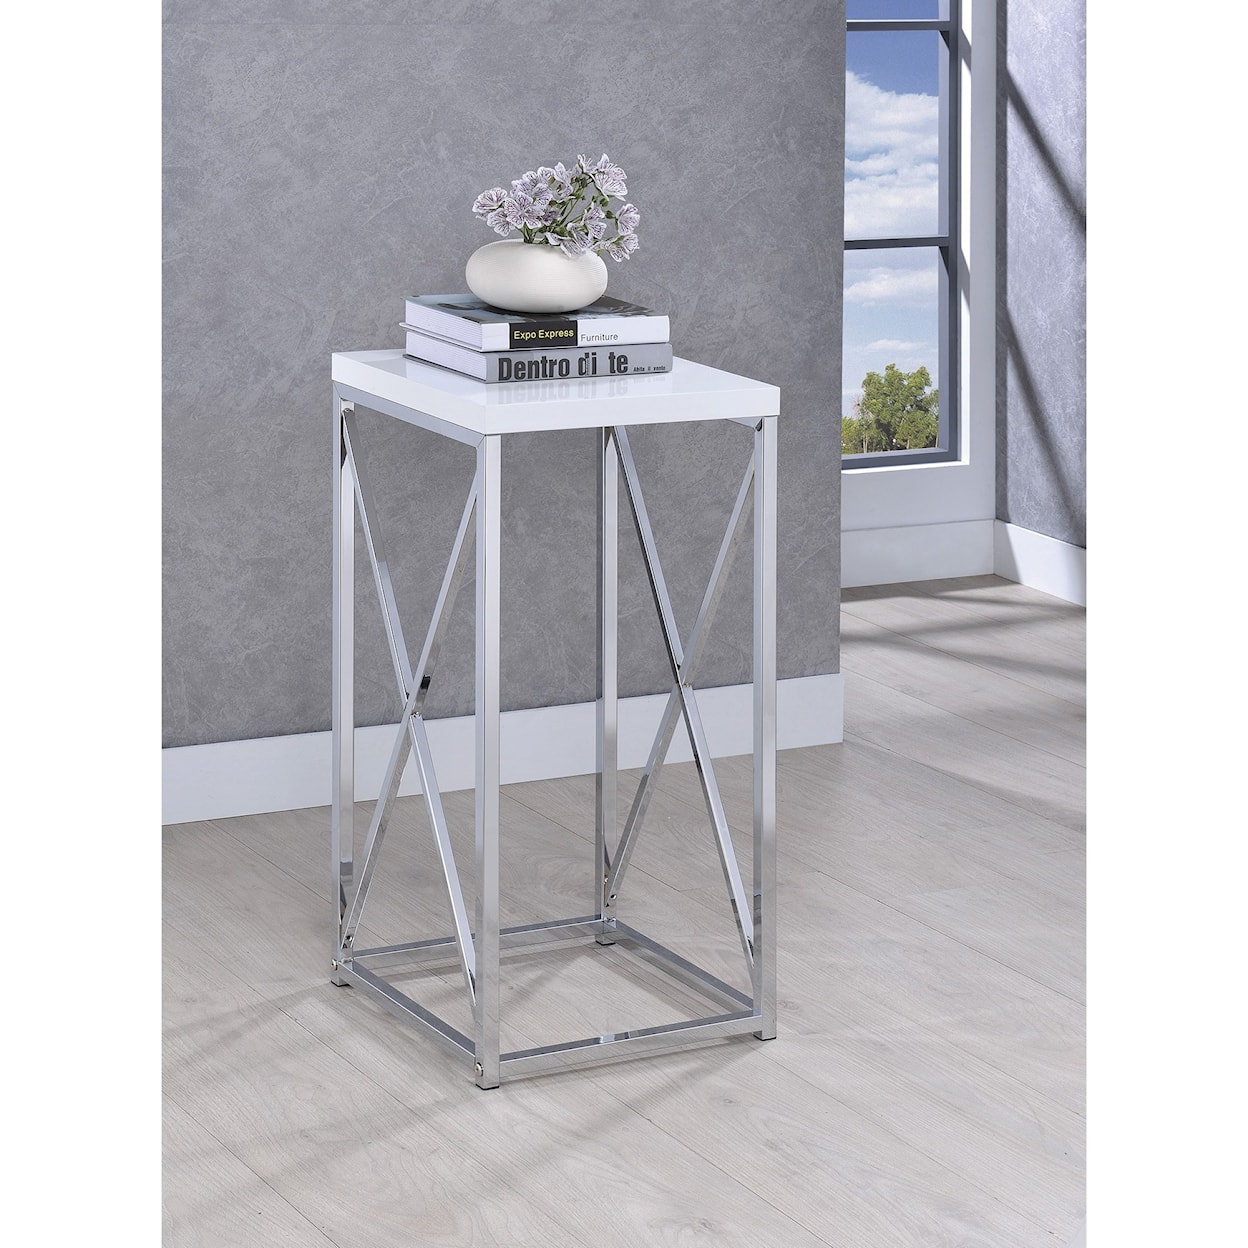 Michael Alan CSR Select Accent Tables Accent Table